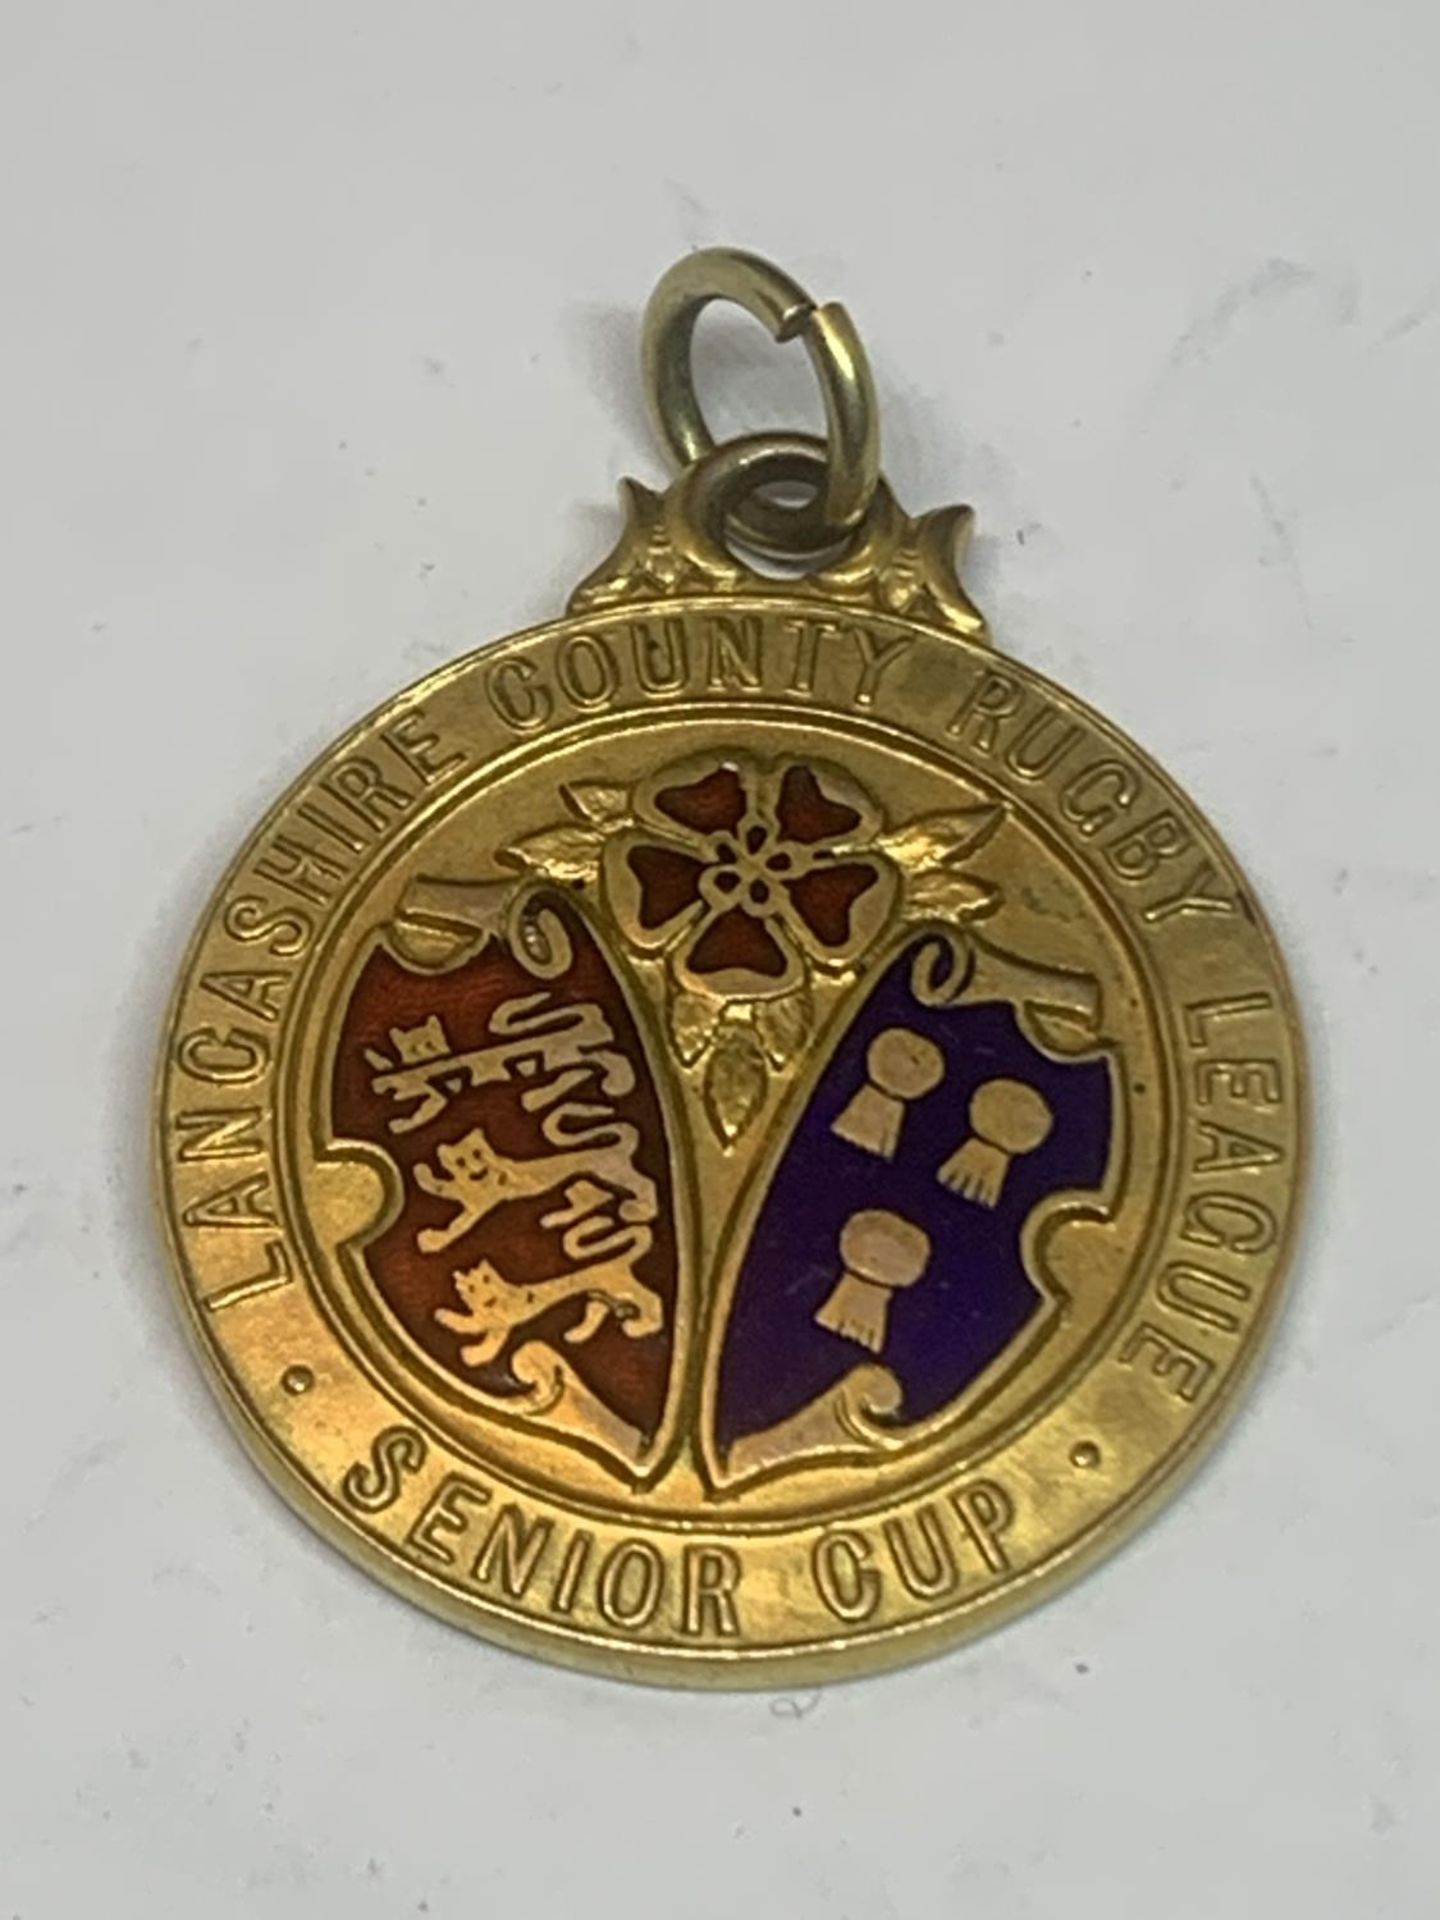 A HALLMARKED 9 CARAT GOLD LANCASHIRE COUNTY RUGBY LEAGUE SENIOR CUP MEDAL GROSS WEIGHT 17.38 GRAMS